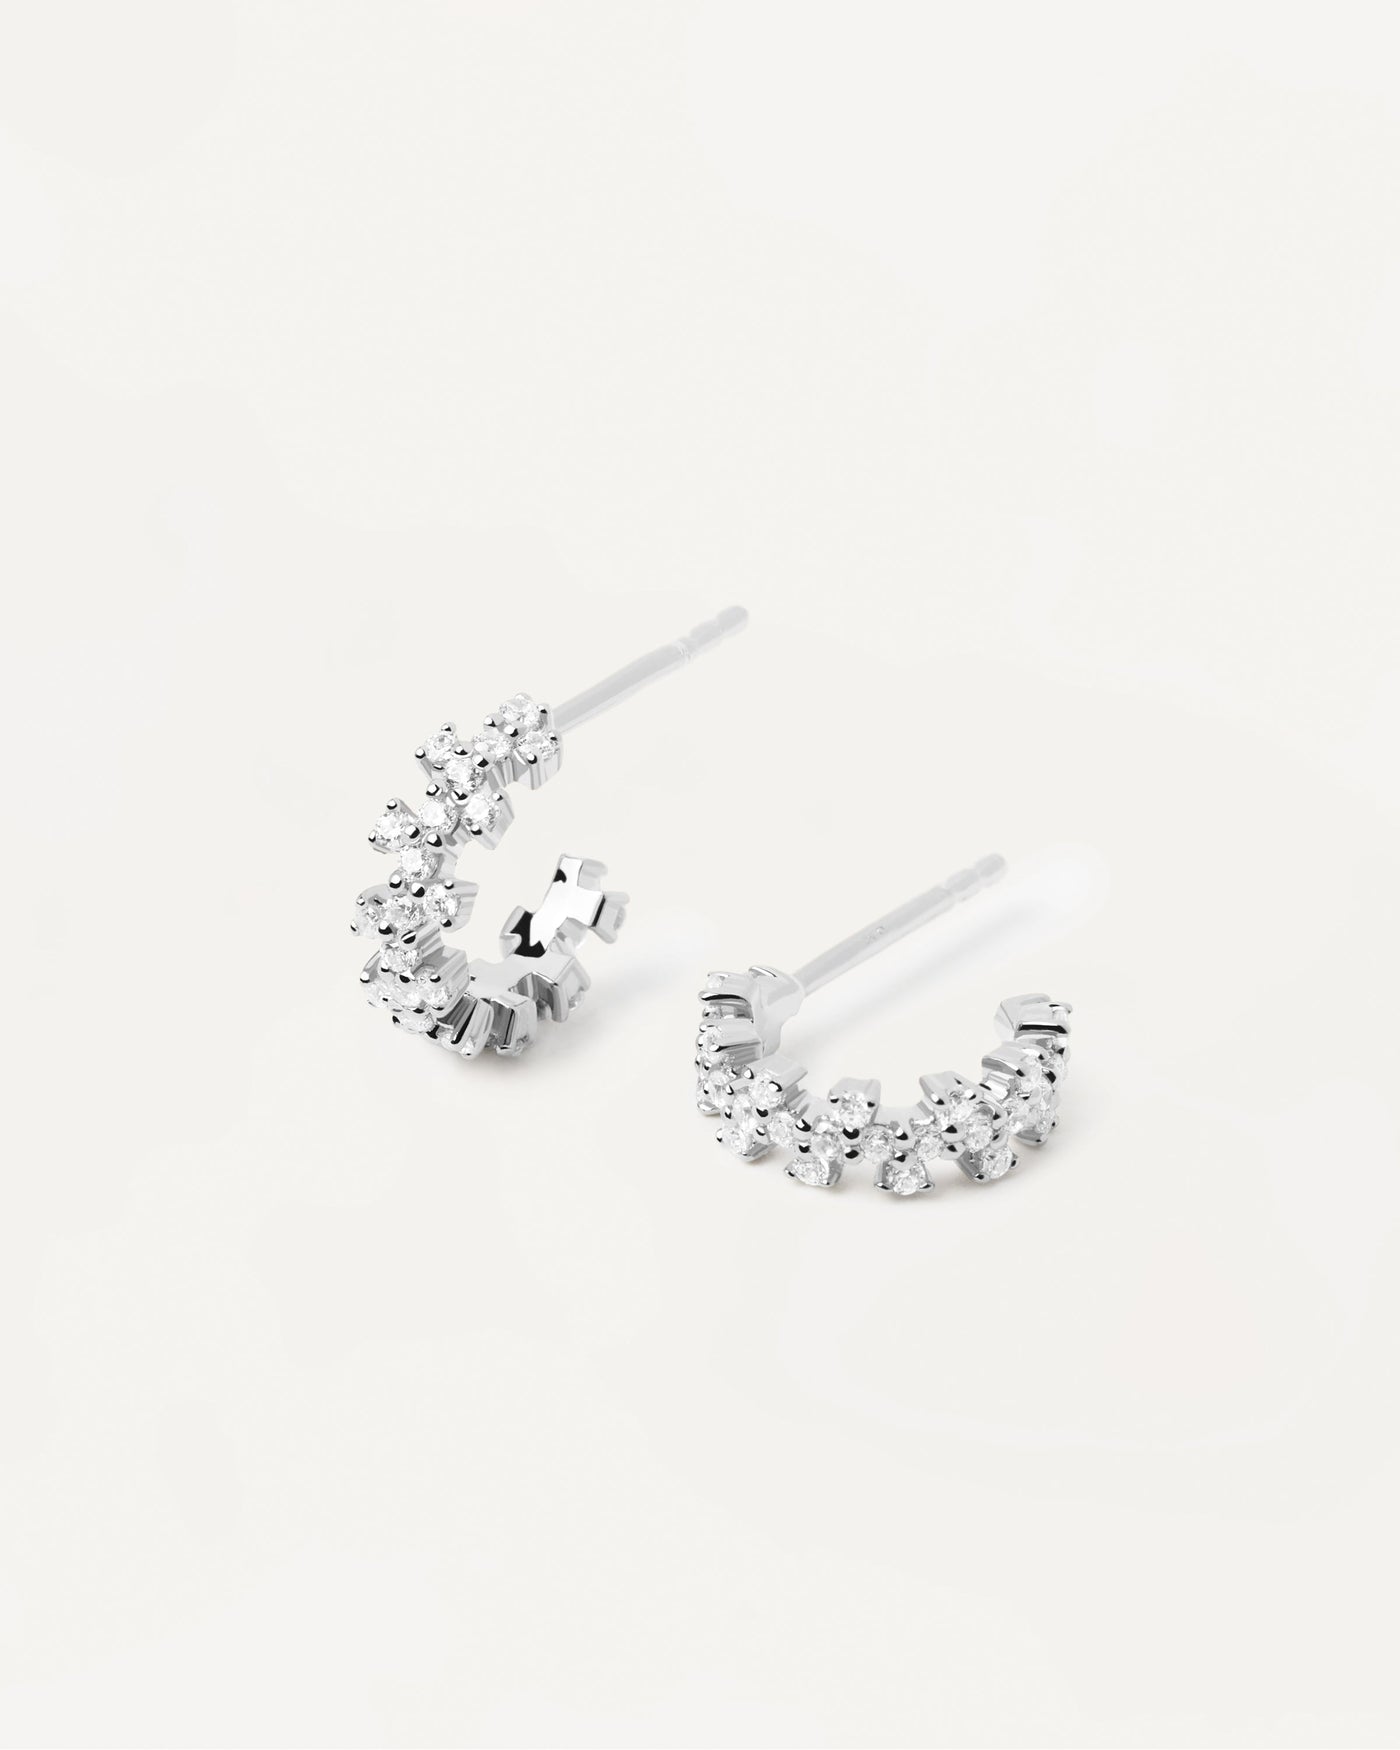 2023 Selection | Little Crown Silver Earrings. Sterling silver small hoops with white zirconia. Get the latest arrival from PDPAOLA. Place your order safely and get this Best Seller. Free Shipping.